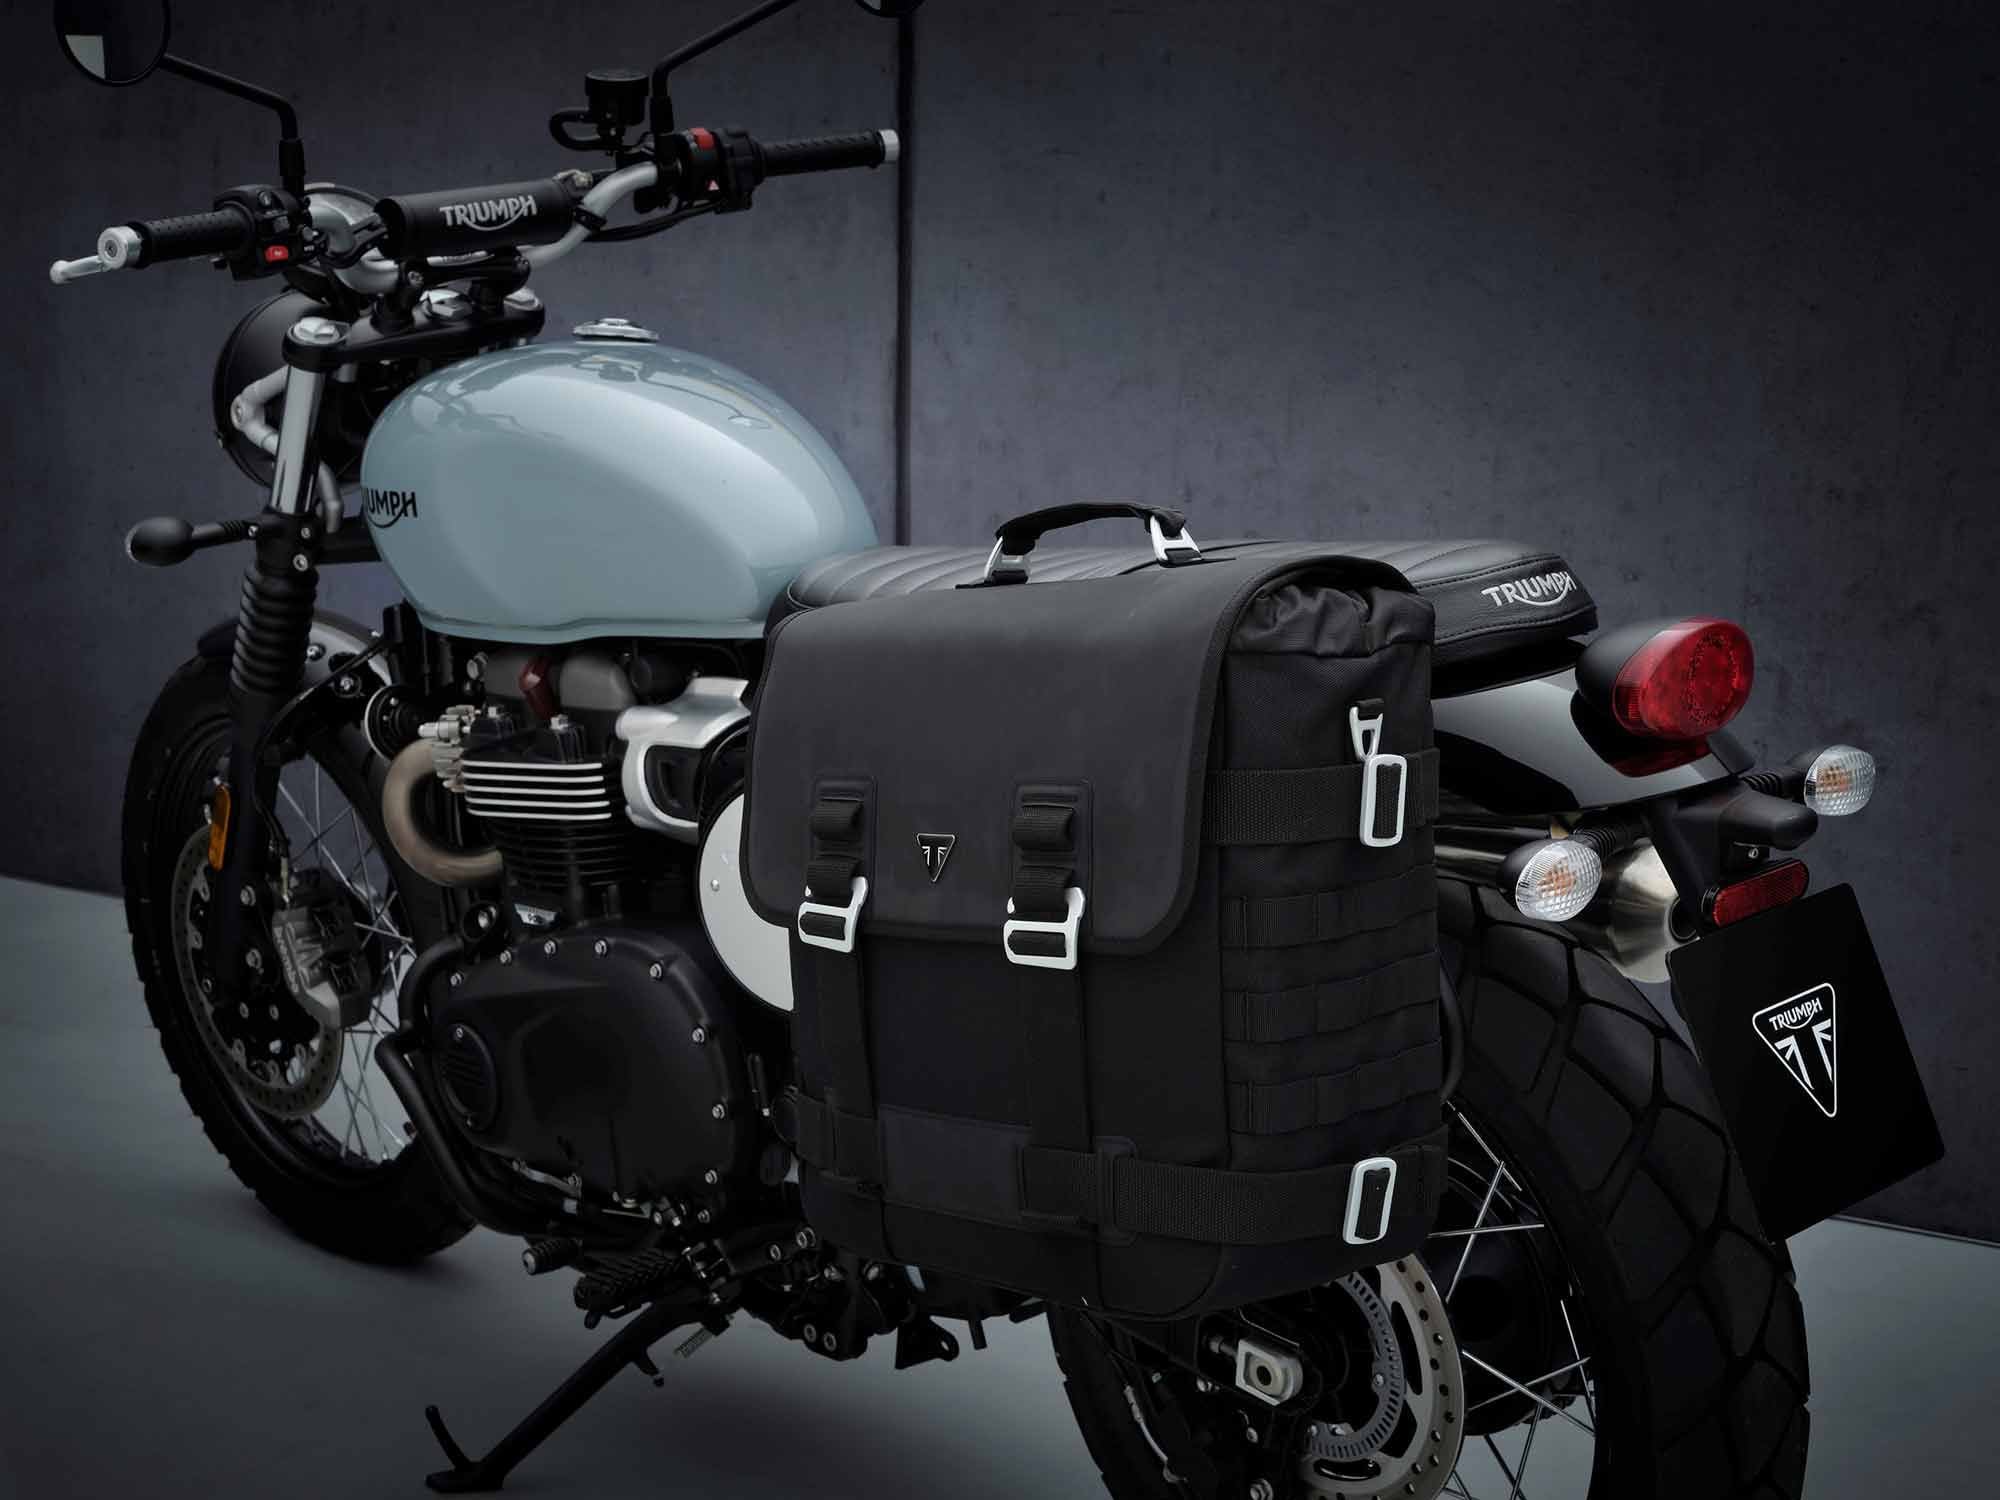 Triumph has also rolled out additional accessory items to support both models, including multiple luggage options, crash protection items, heated grips, and the like.